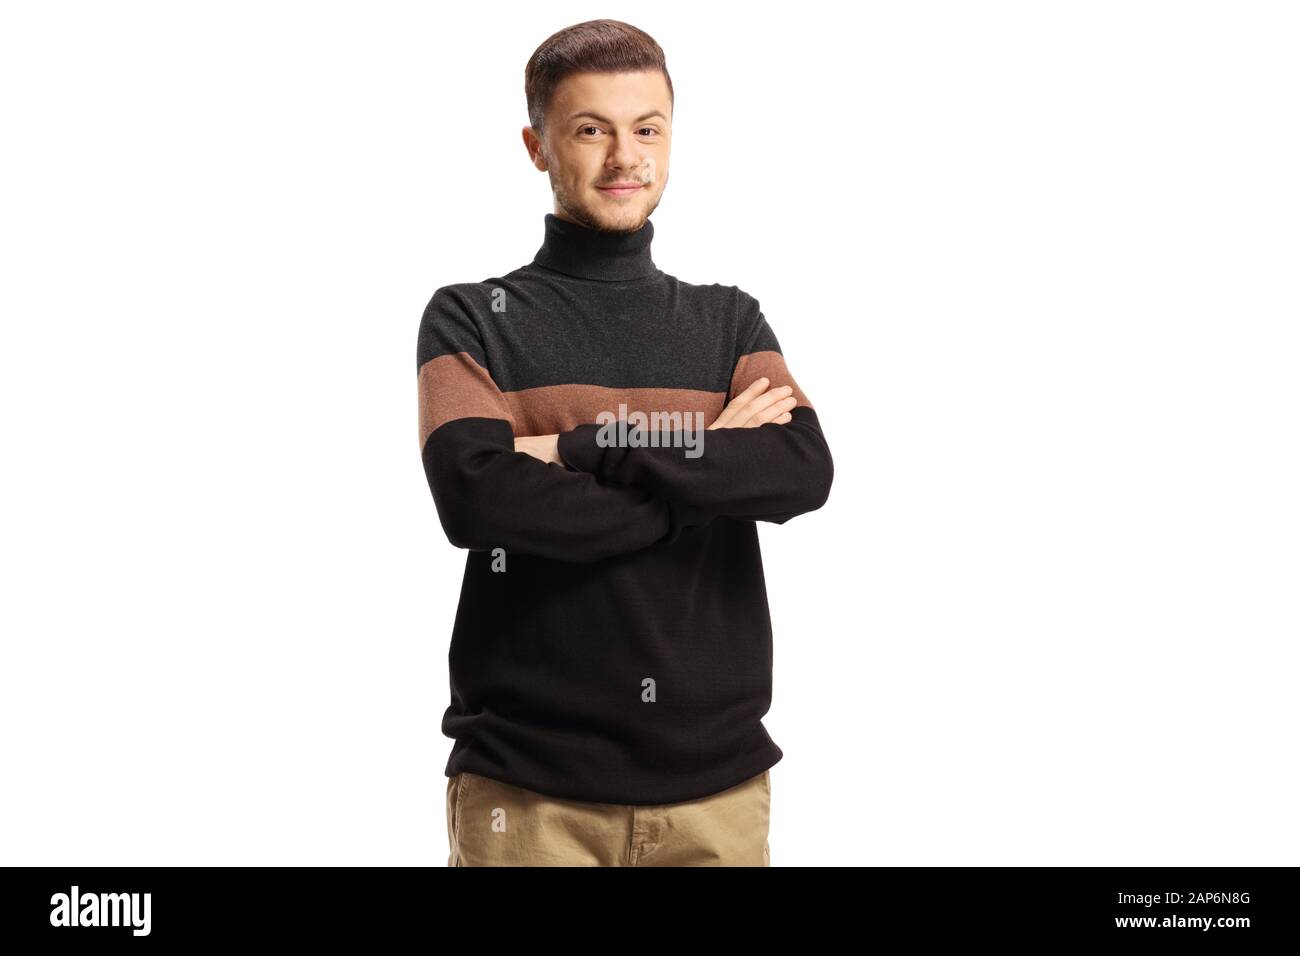 Young smiling guy wearing a turtleneck sweather posing with arms crossed isolated on white background Stock Photo